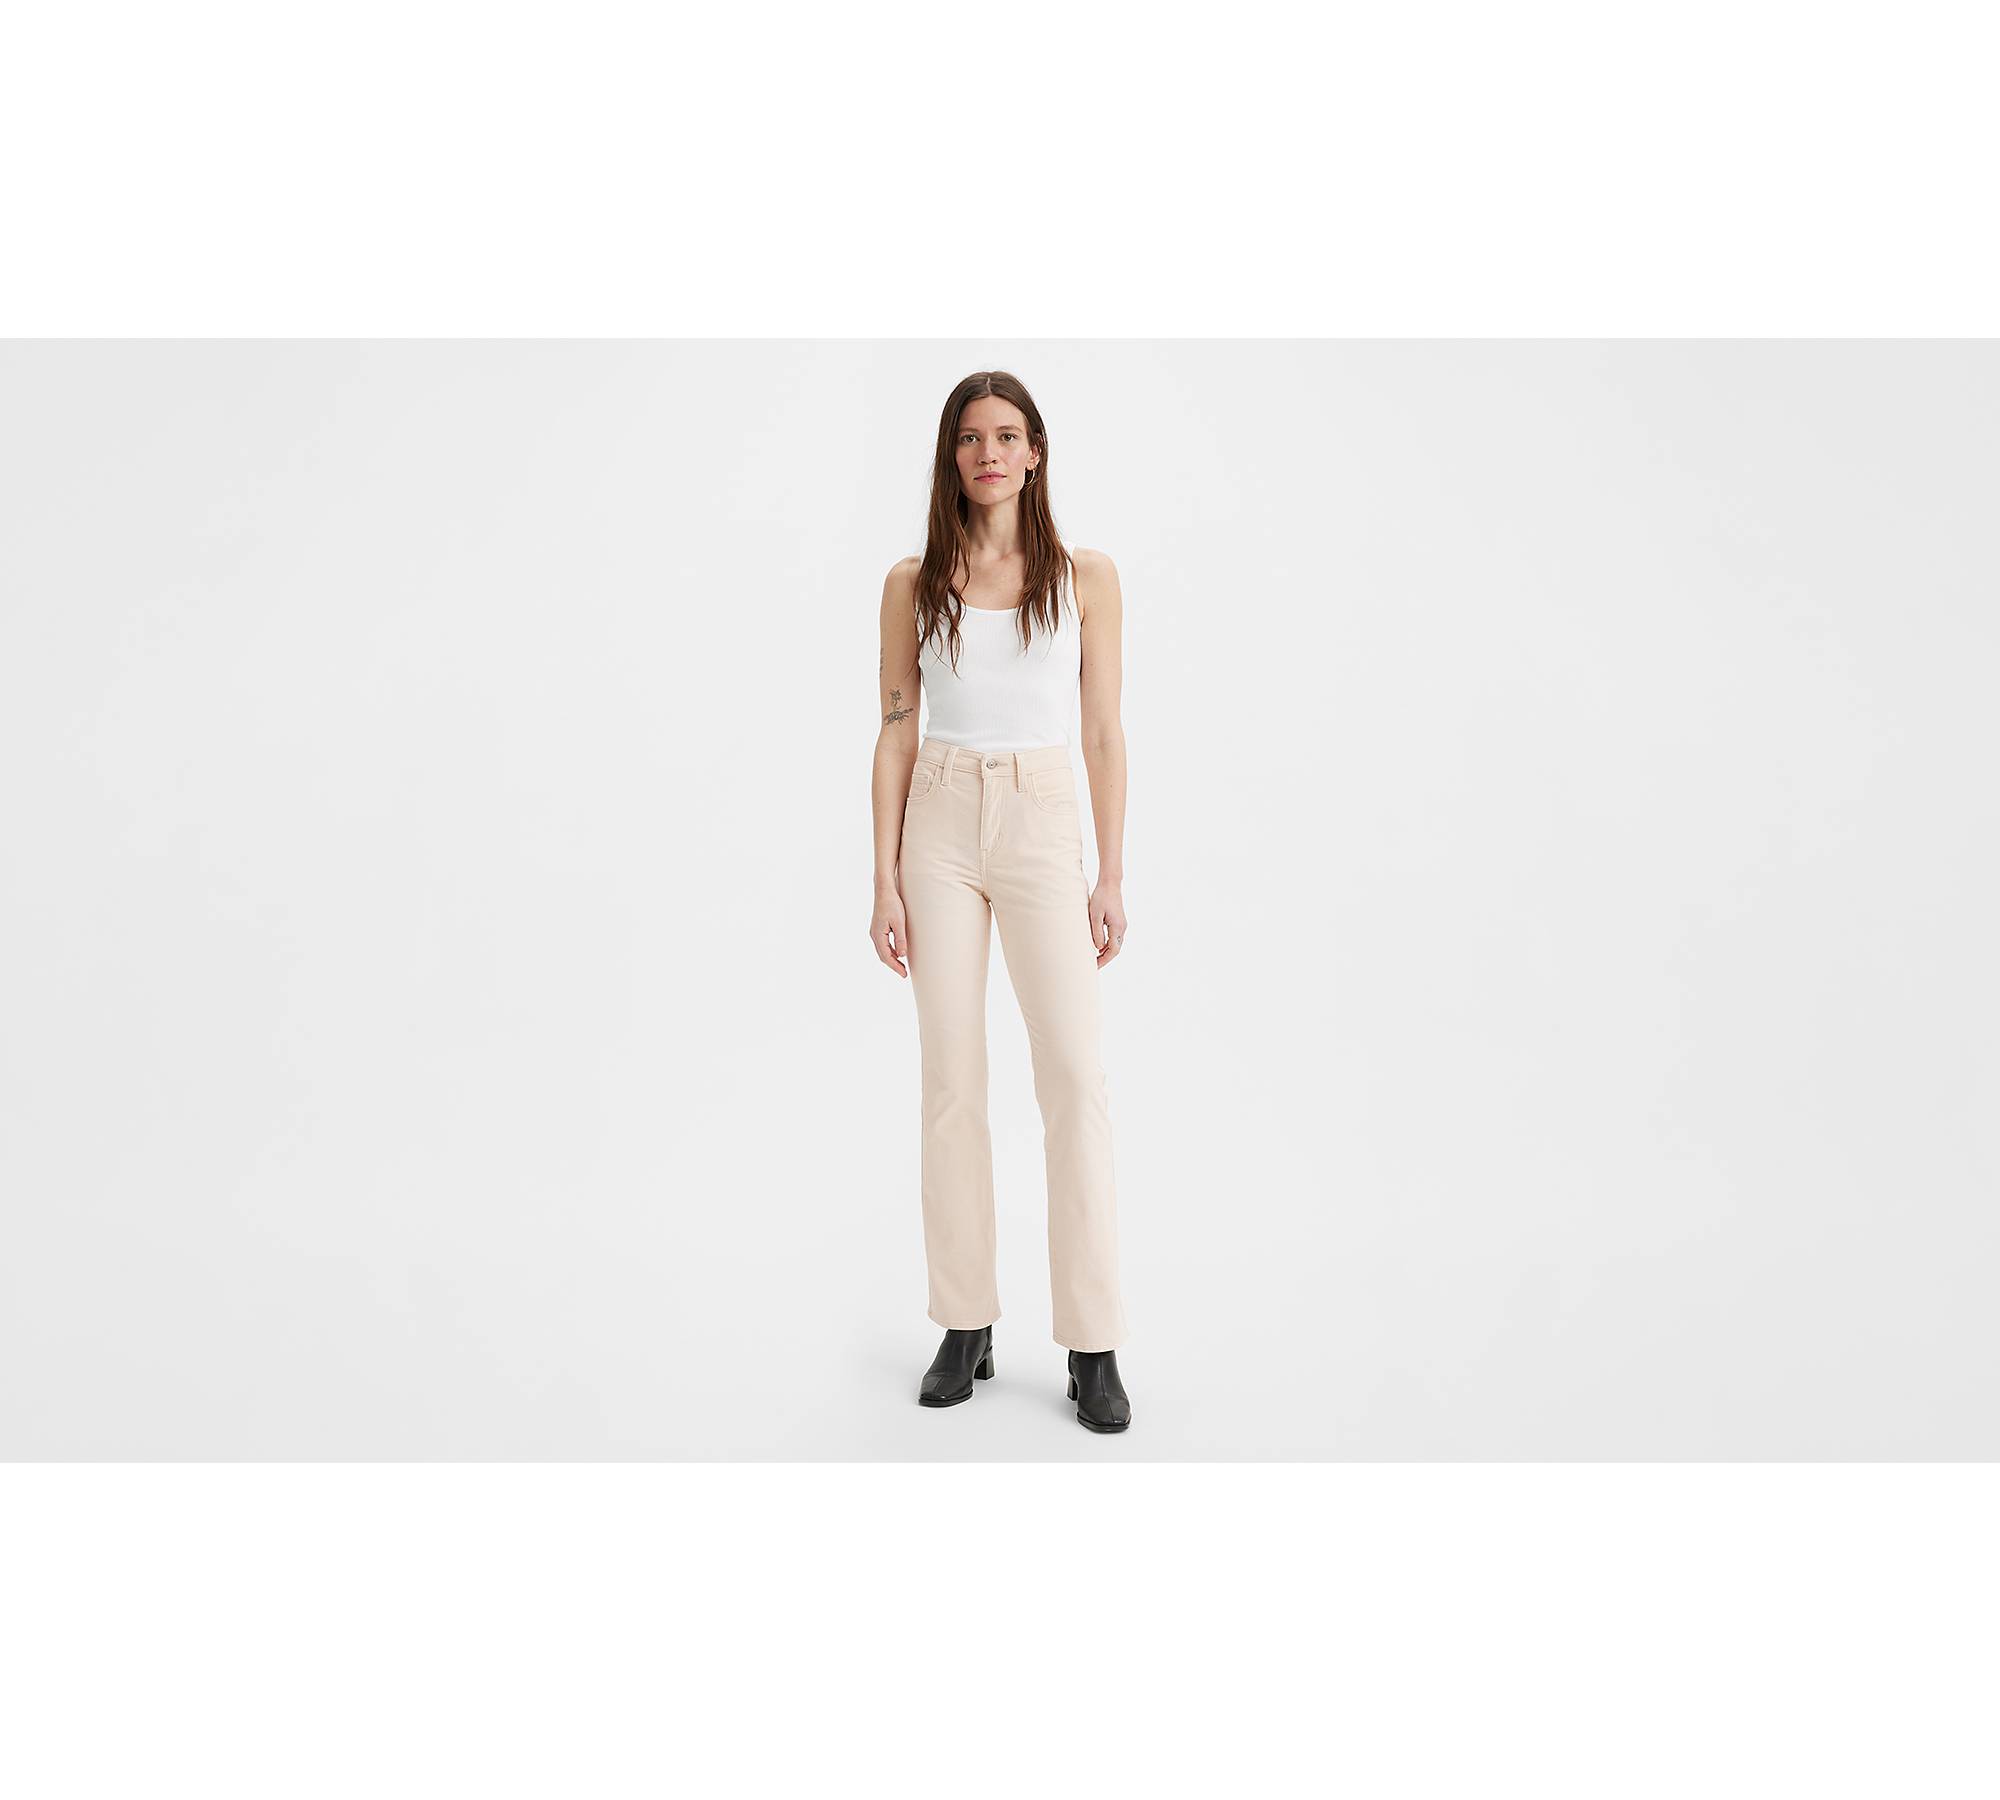 Women's Tailored Relaxed Straight Pant, Women's Clearance